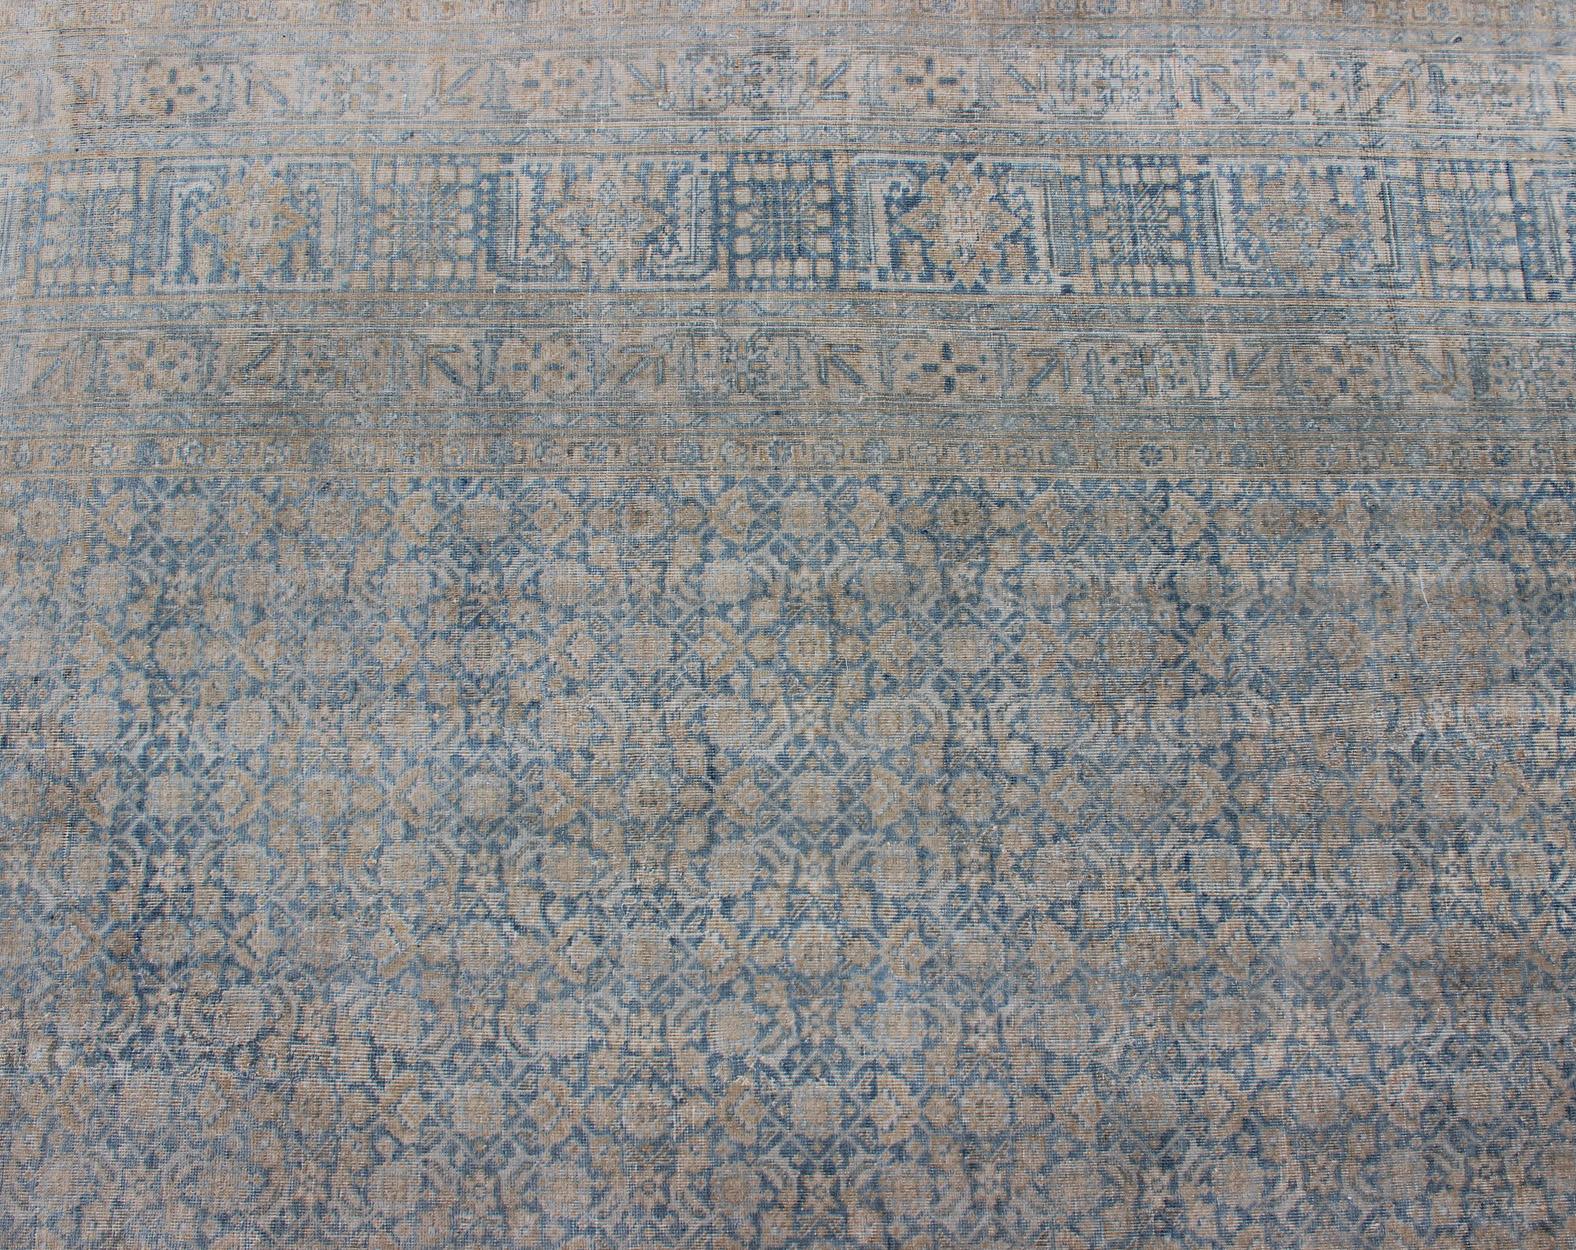 Large Antique Persian Tabriz Rug in All-Over Herati in Shades of Blue and Tan  For Sale 1